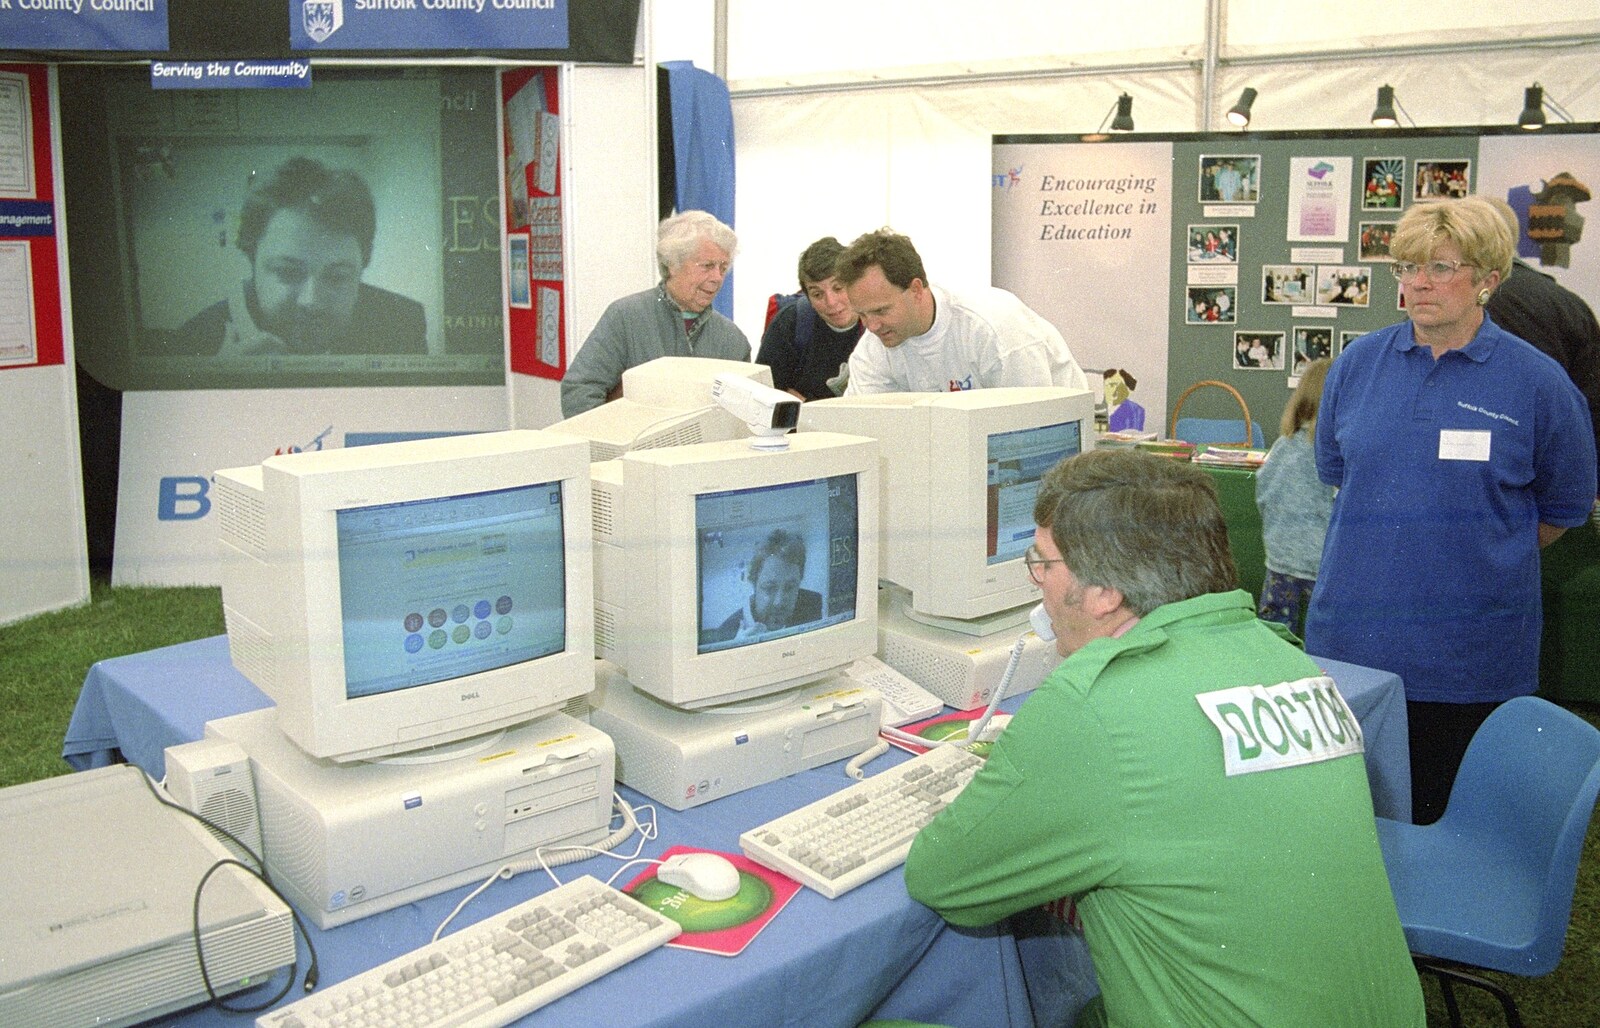 Suffolk County Concillor Chris Mole video-conferences with a Doctor in a tent in a field at the Suffolk Show in 1997. The video is running over a temporary ISDN line installed by BT for the occasion. The system was also used by a deaf group and it enabled them to use sign language with people not in line of sight for the first time ever.